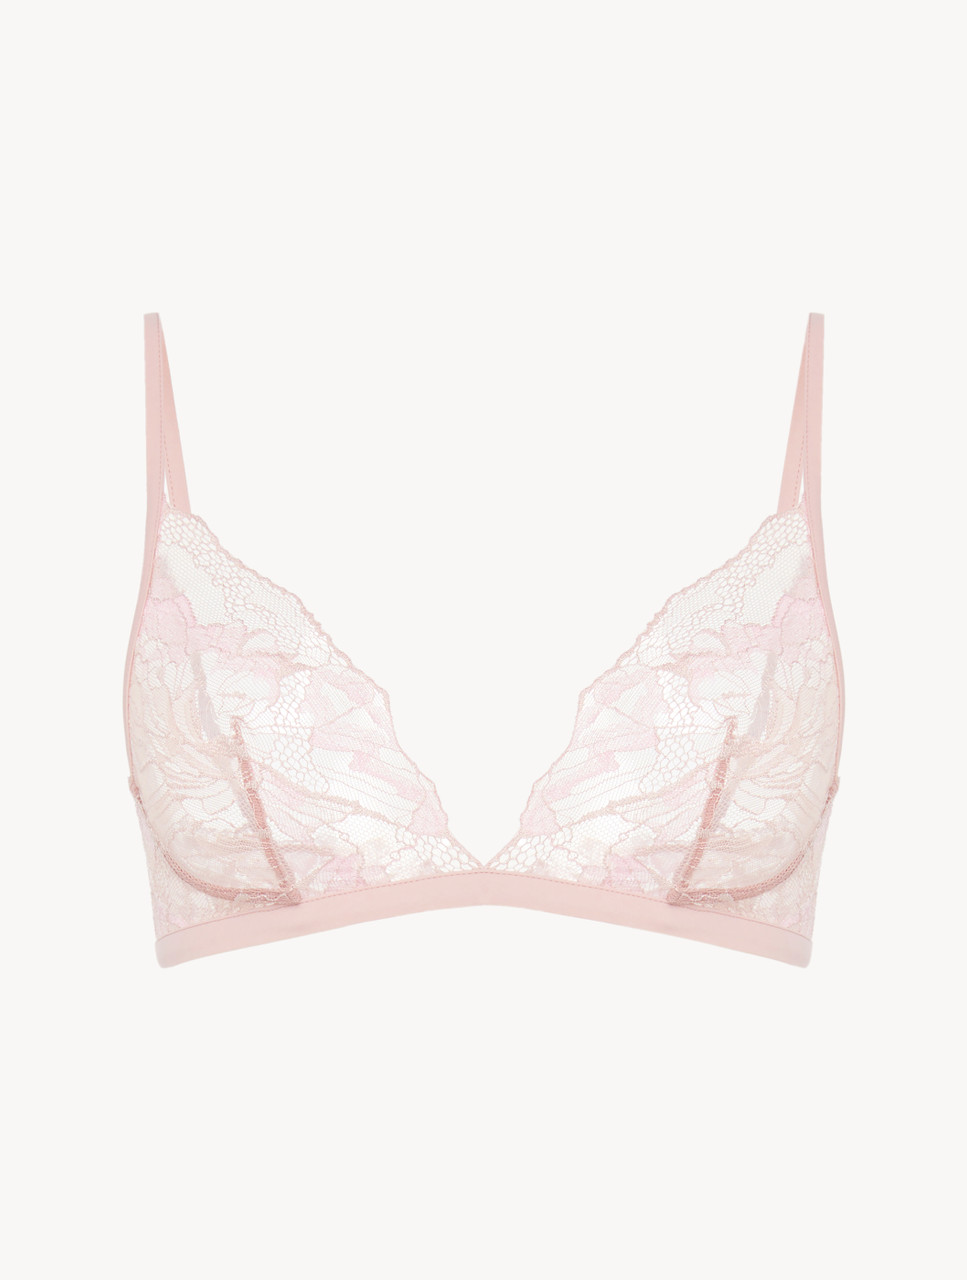 Triangle bra in pink with French Leavers lace